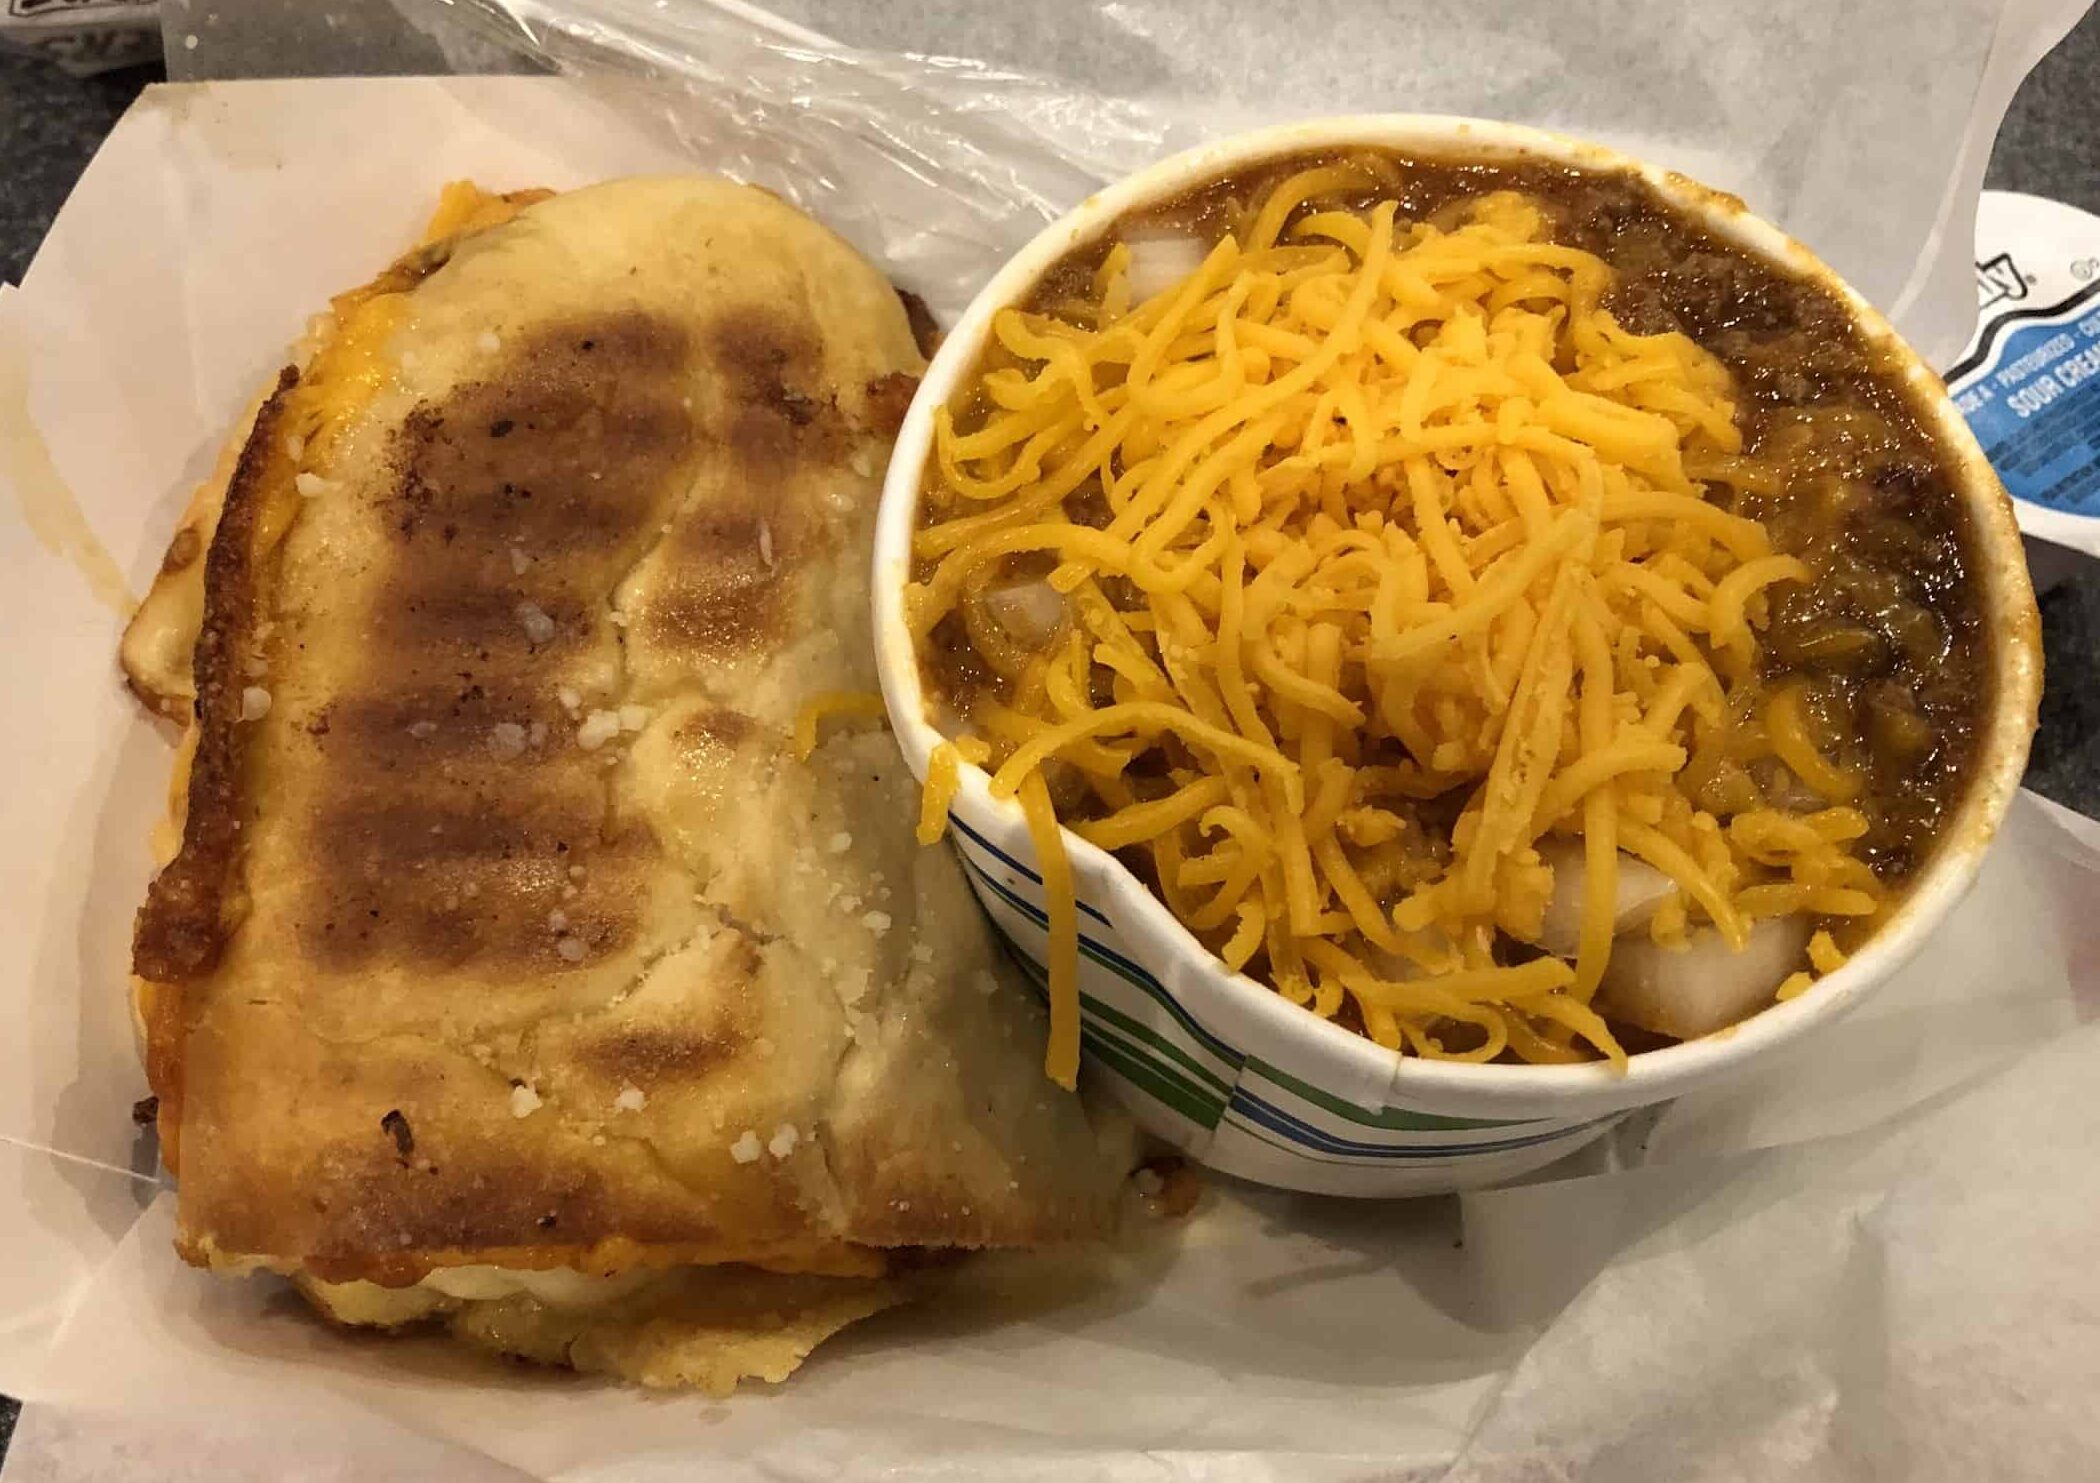 Grilled cheese and chili at the COWfé